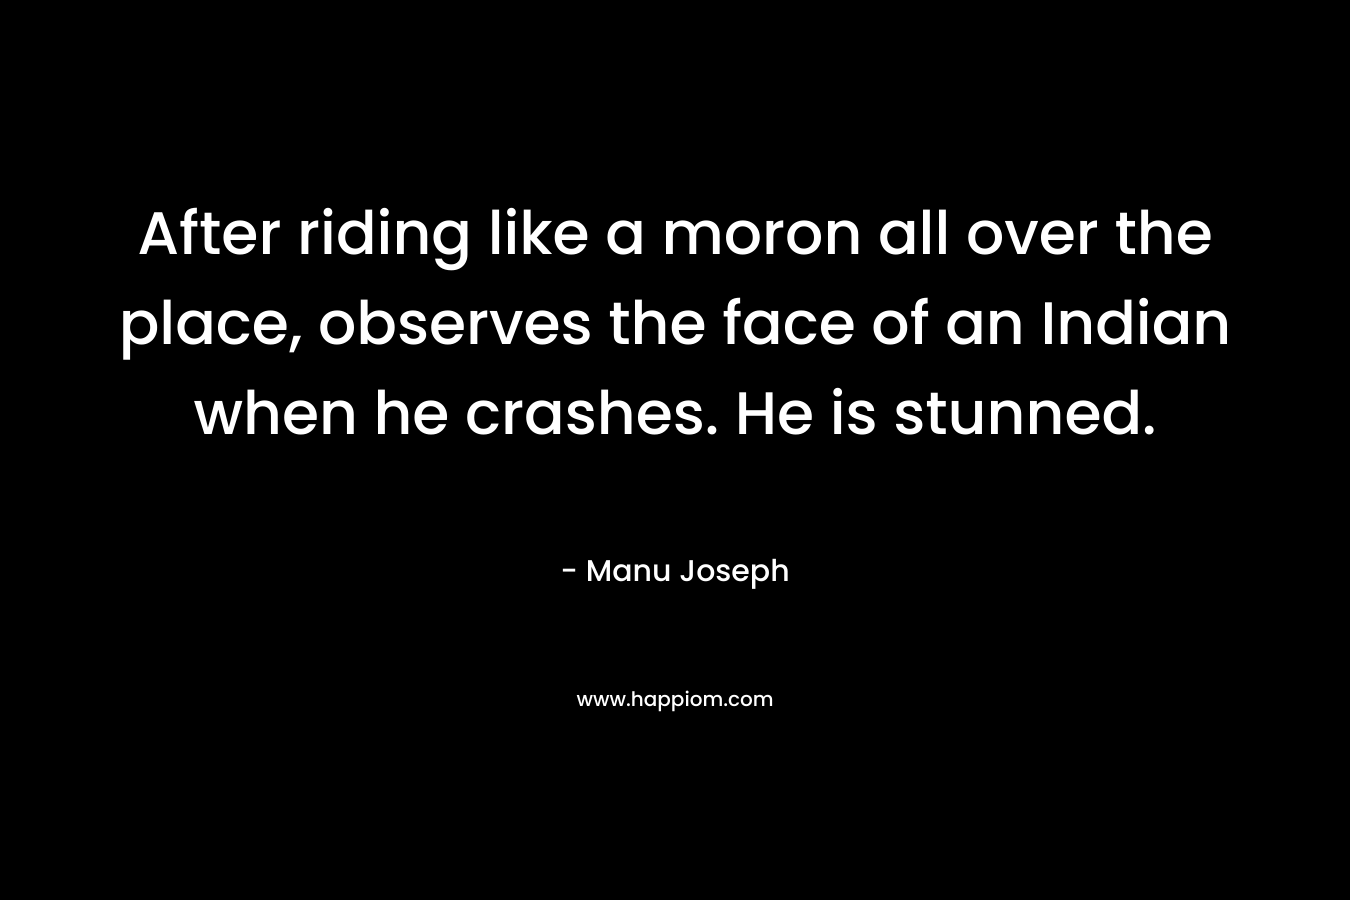 After riding like a moron all over the place, observes the face of an Indian when he crashes. He is stunned.